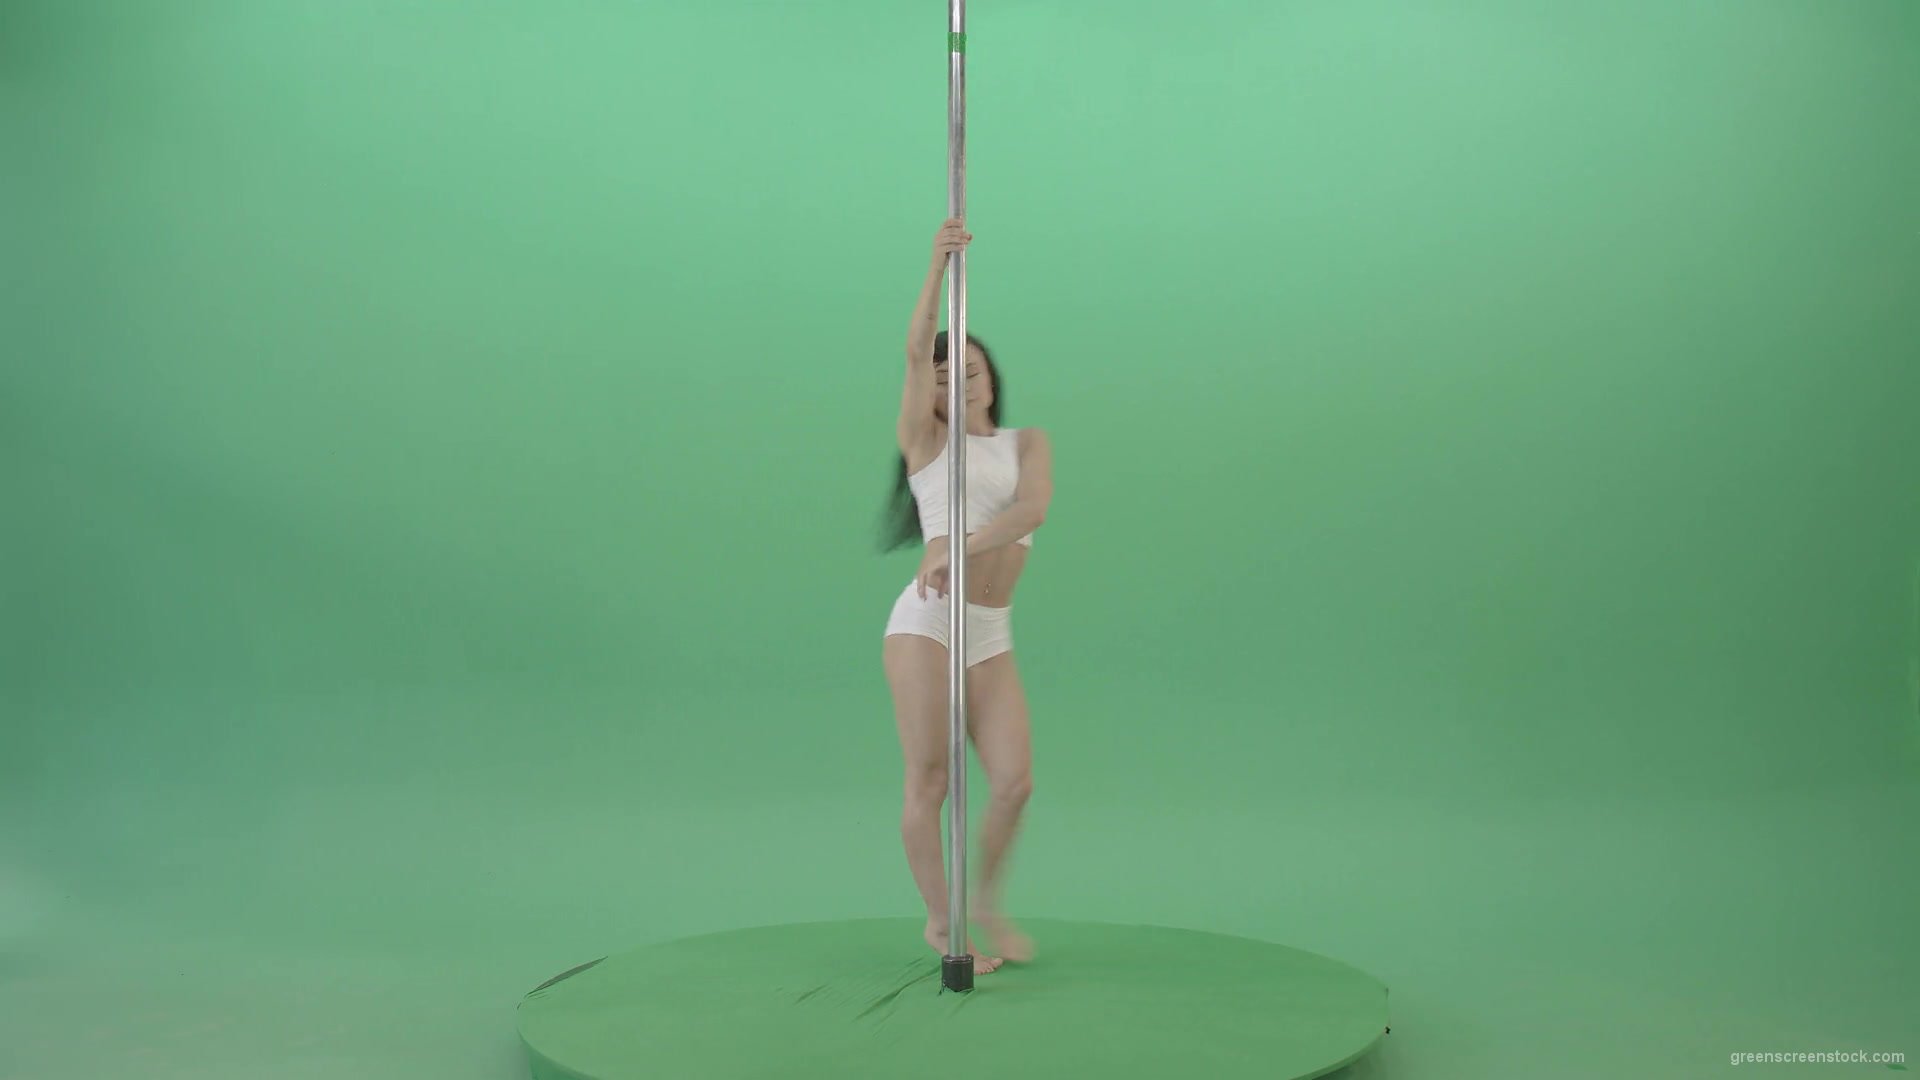 Sport-Fit-Girl-spinning-on-pole-making-acrobatic-element-on-green-screen-1920_002 Green Screen Stock